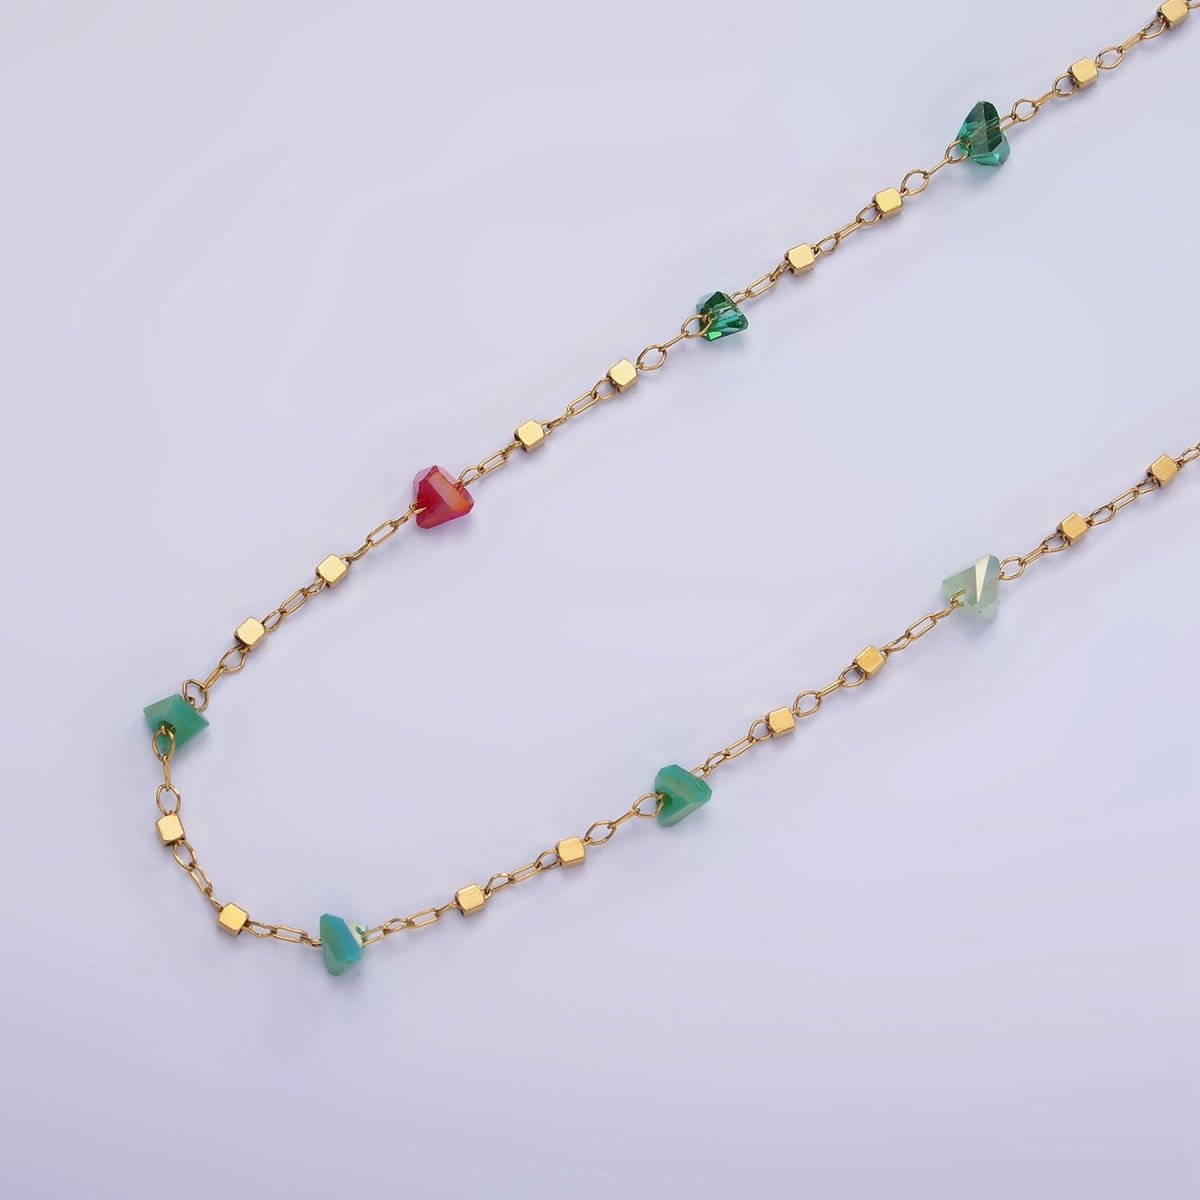 Multi Gemstone Rondell Beaded Chain Rosary Chain Per Yard in Gold Stainless Steel ROLL-1504 - DLUXCA